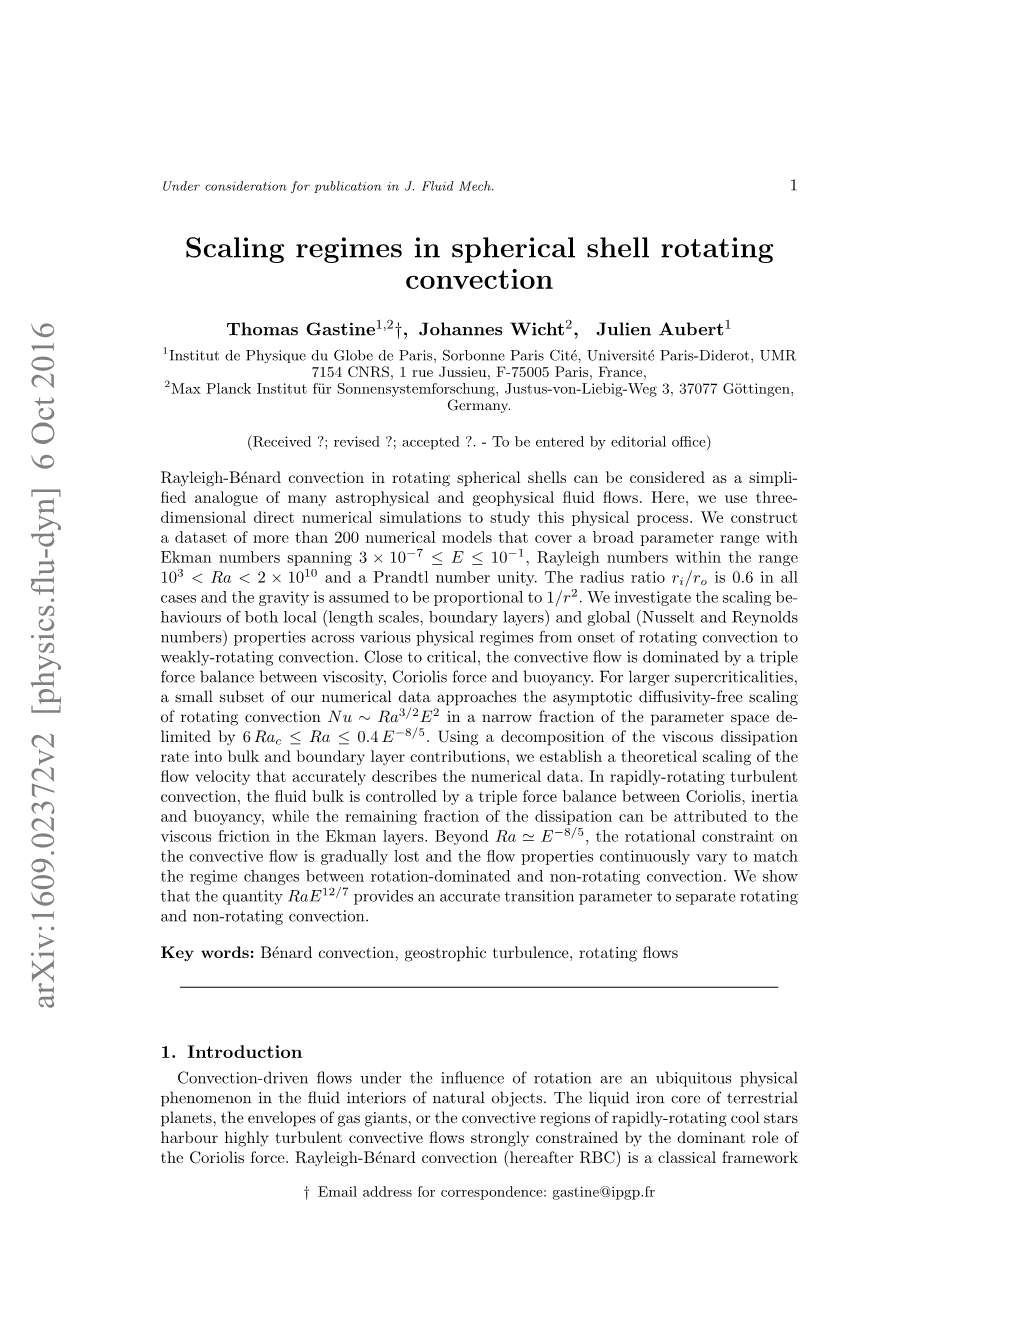 Scaling Regimes in Spherical Shell Rotating Convection